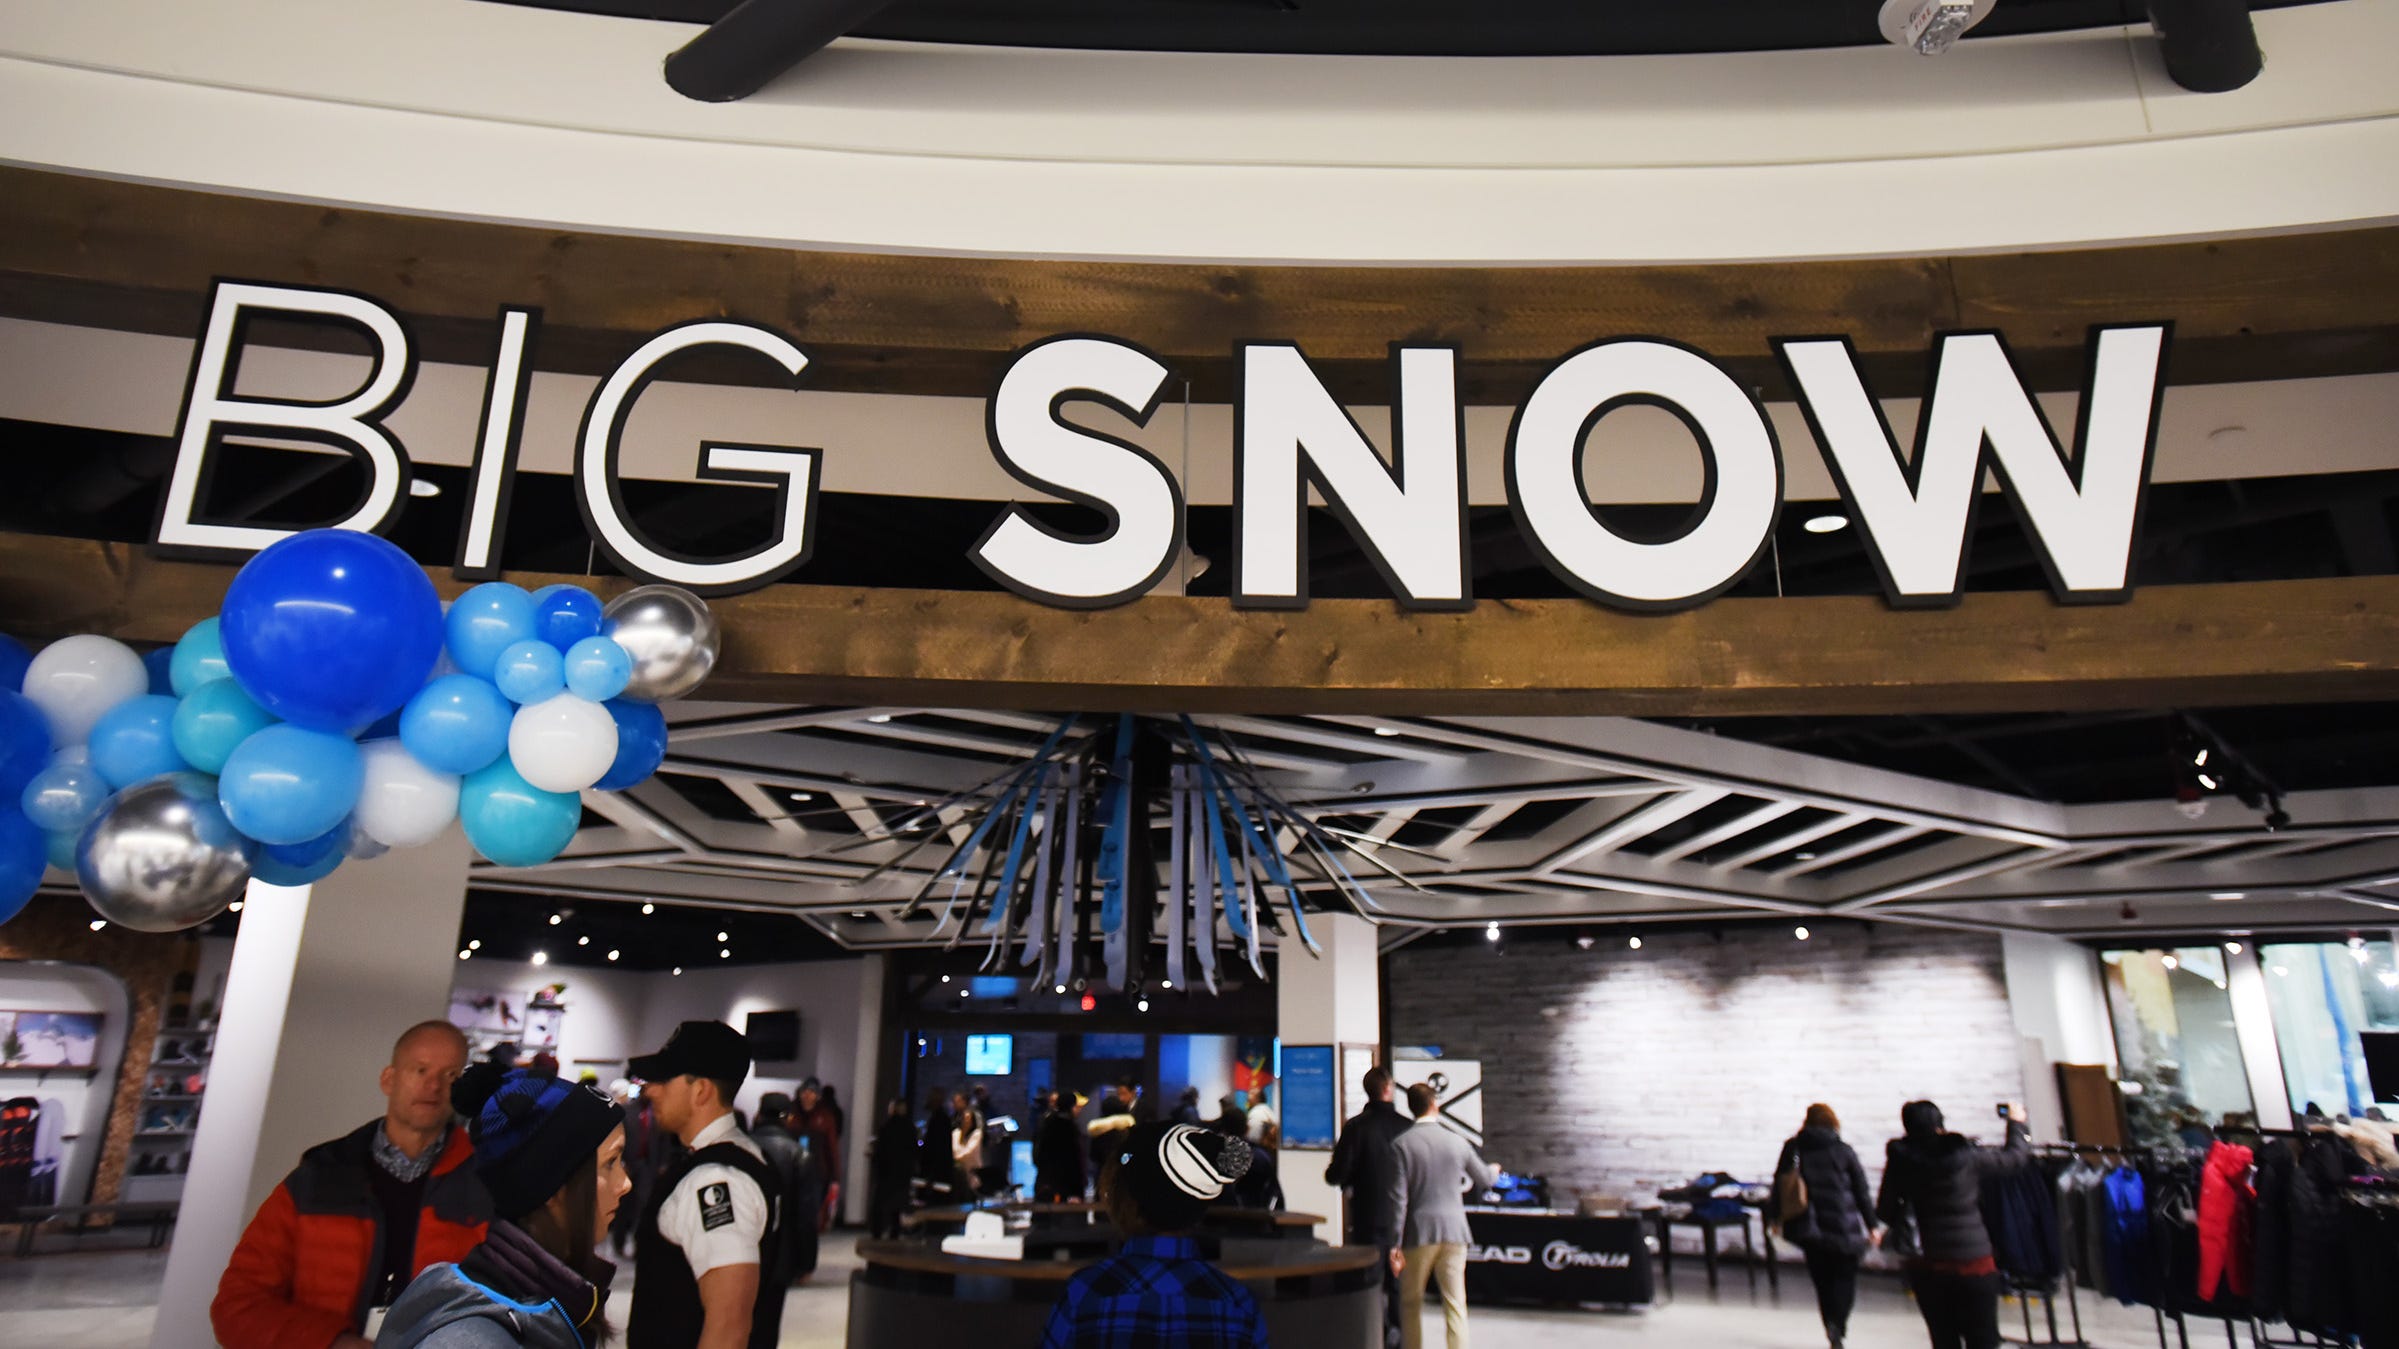 American Dream mall: Big SNOW indoor ski slope opens in New Jersey